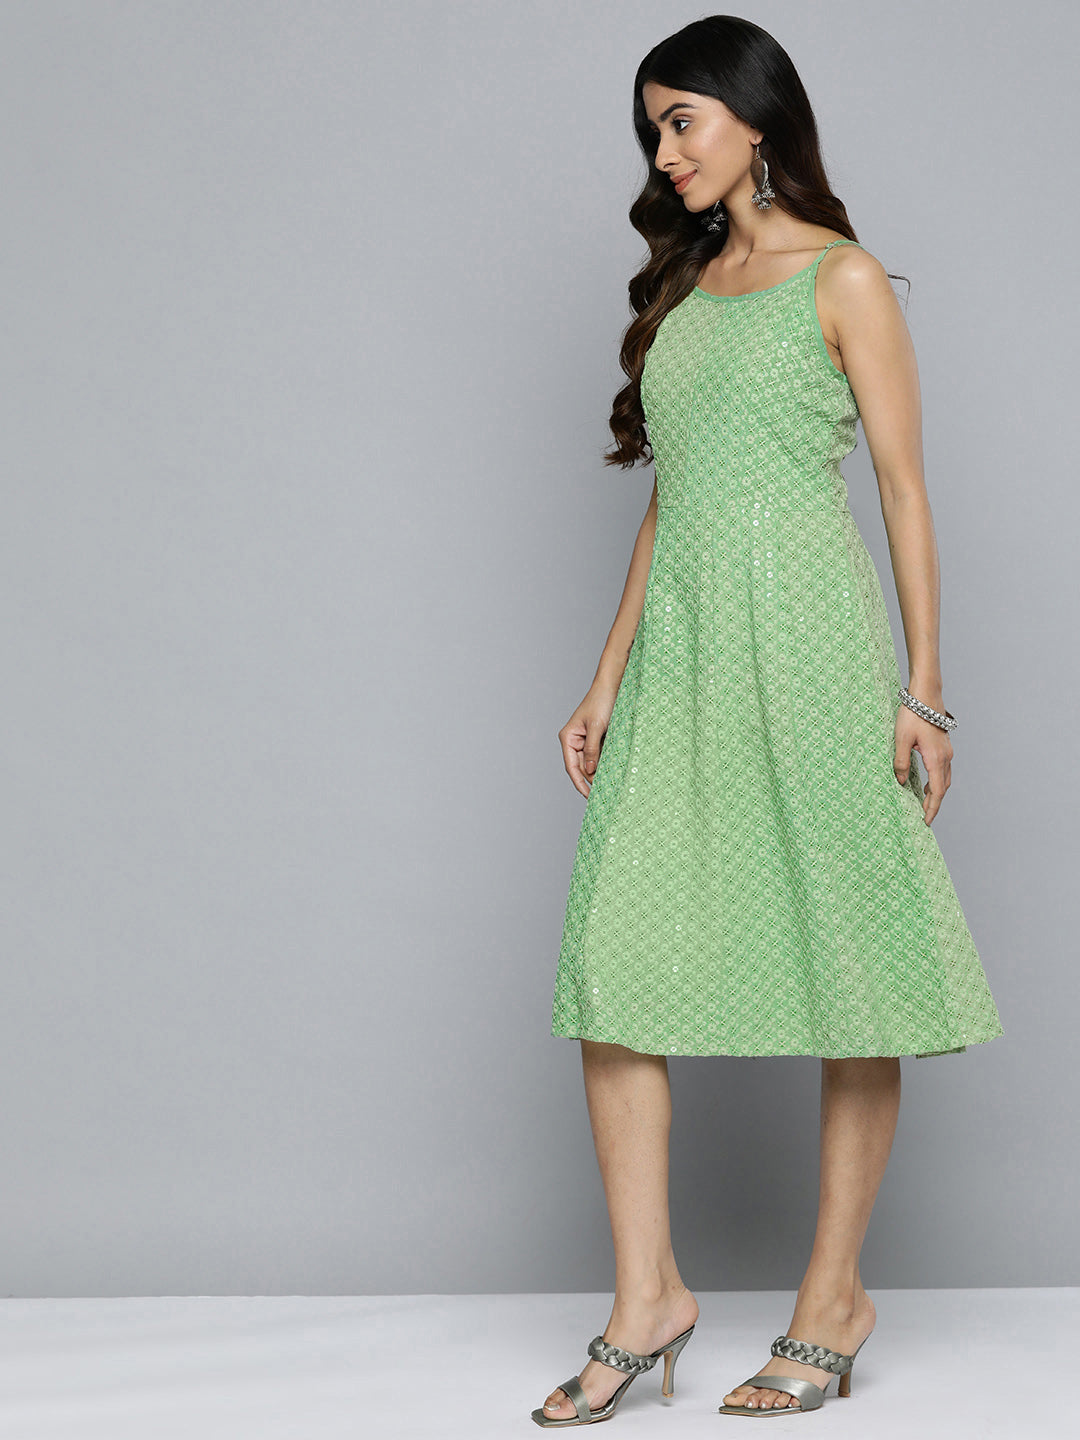 Jompers Green Floral Sequin Embroidered A-Line Midi Dress ( JOK 1494 Pista )